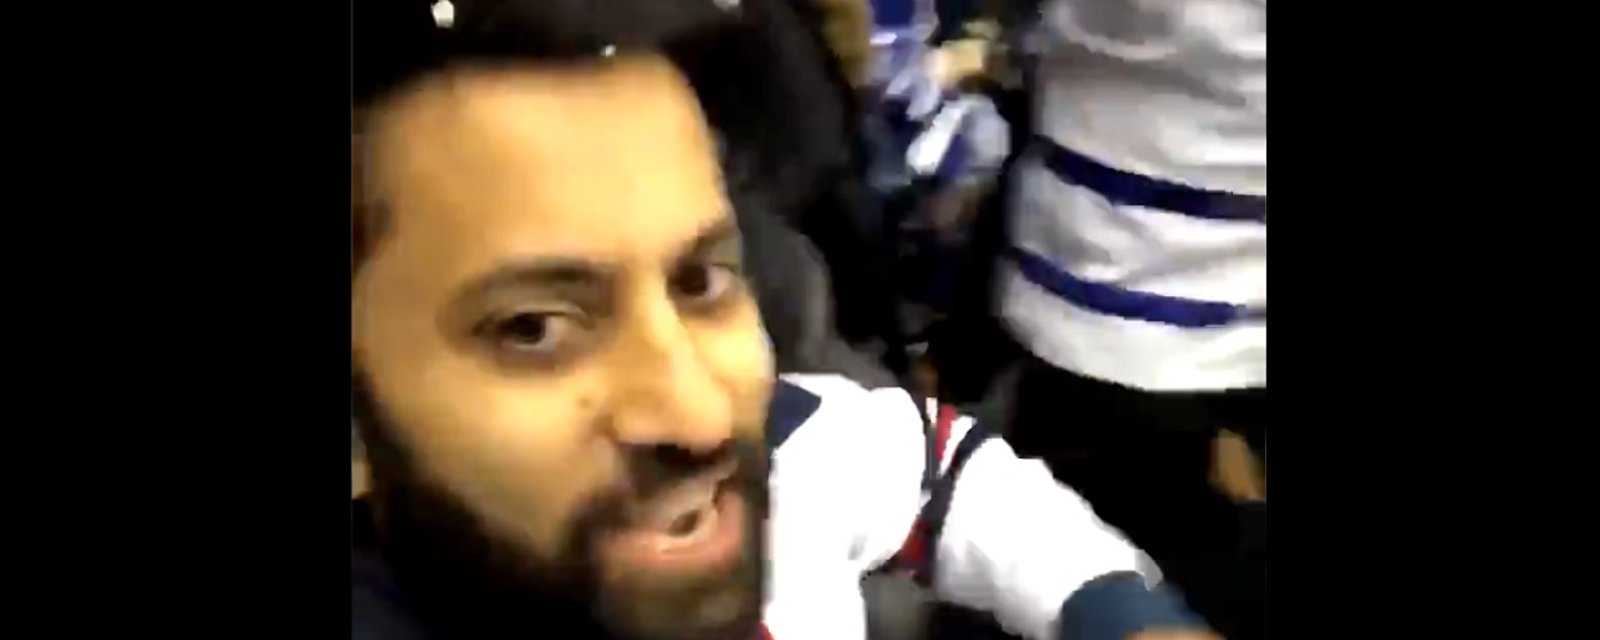 Jets fan publishes video showing harassment at the hands of Maple Leafs fans.